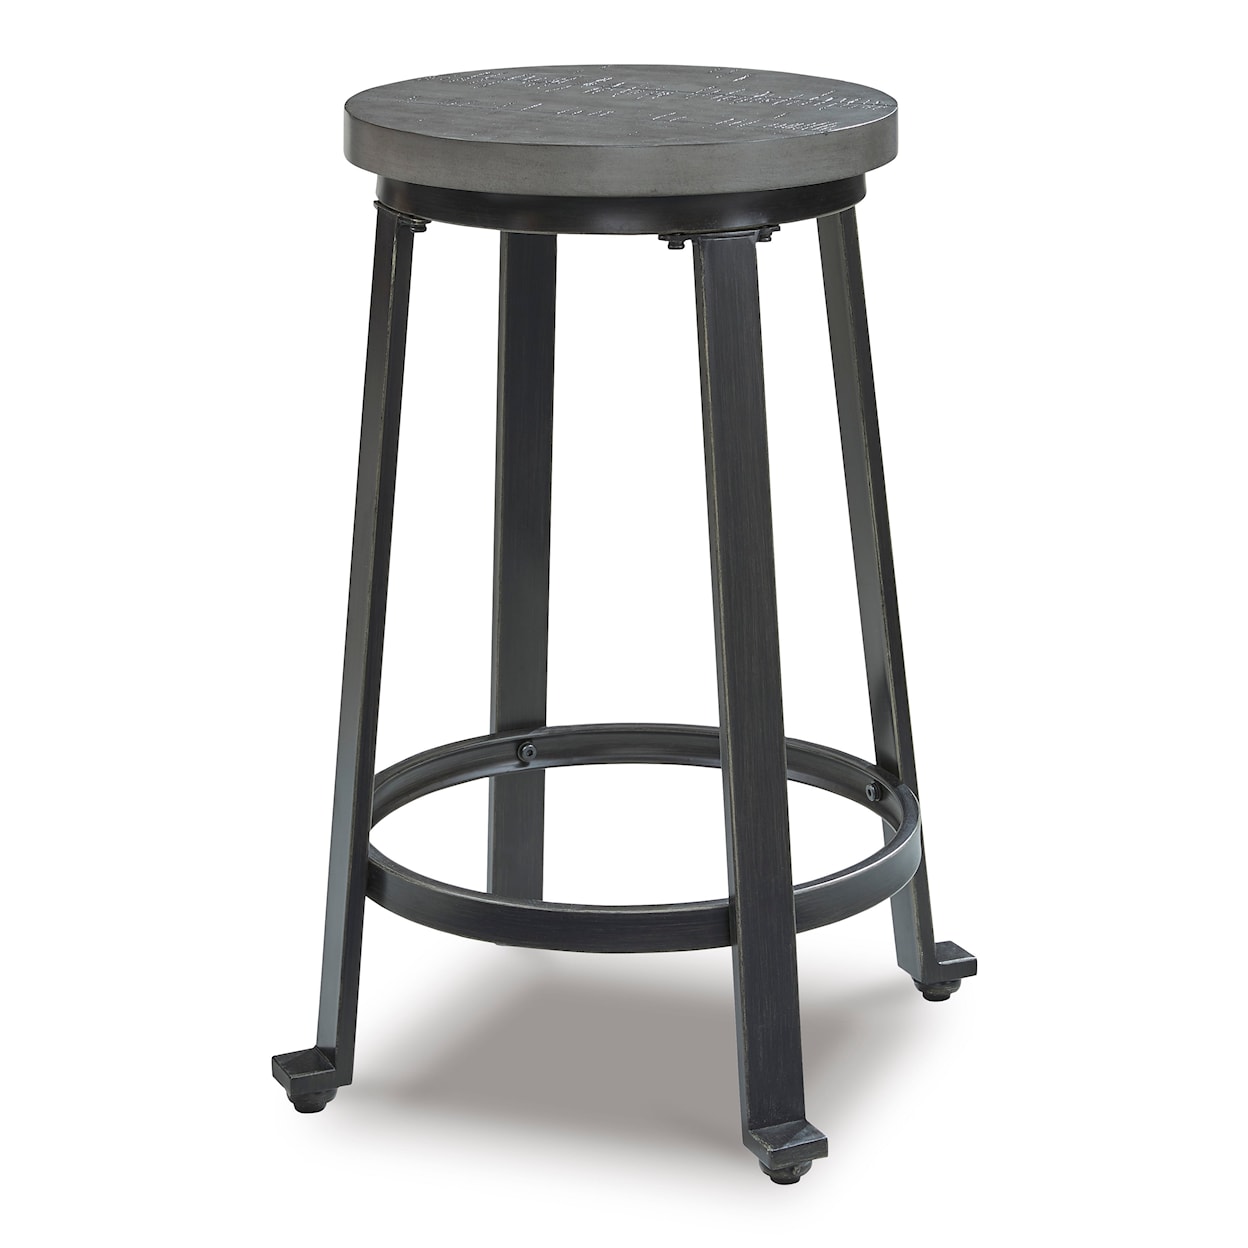 Signature Design by Ashley Challiman Counter Height Stool